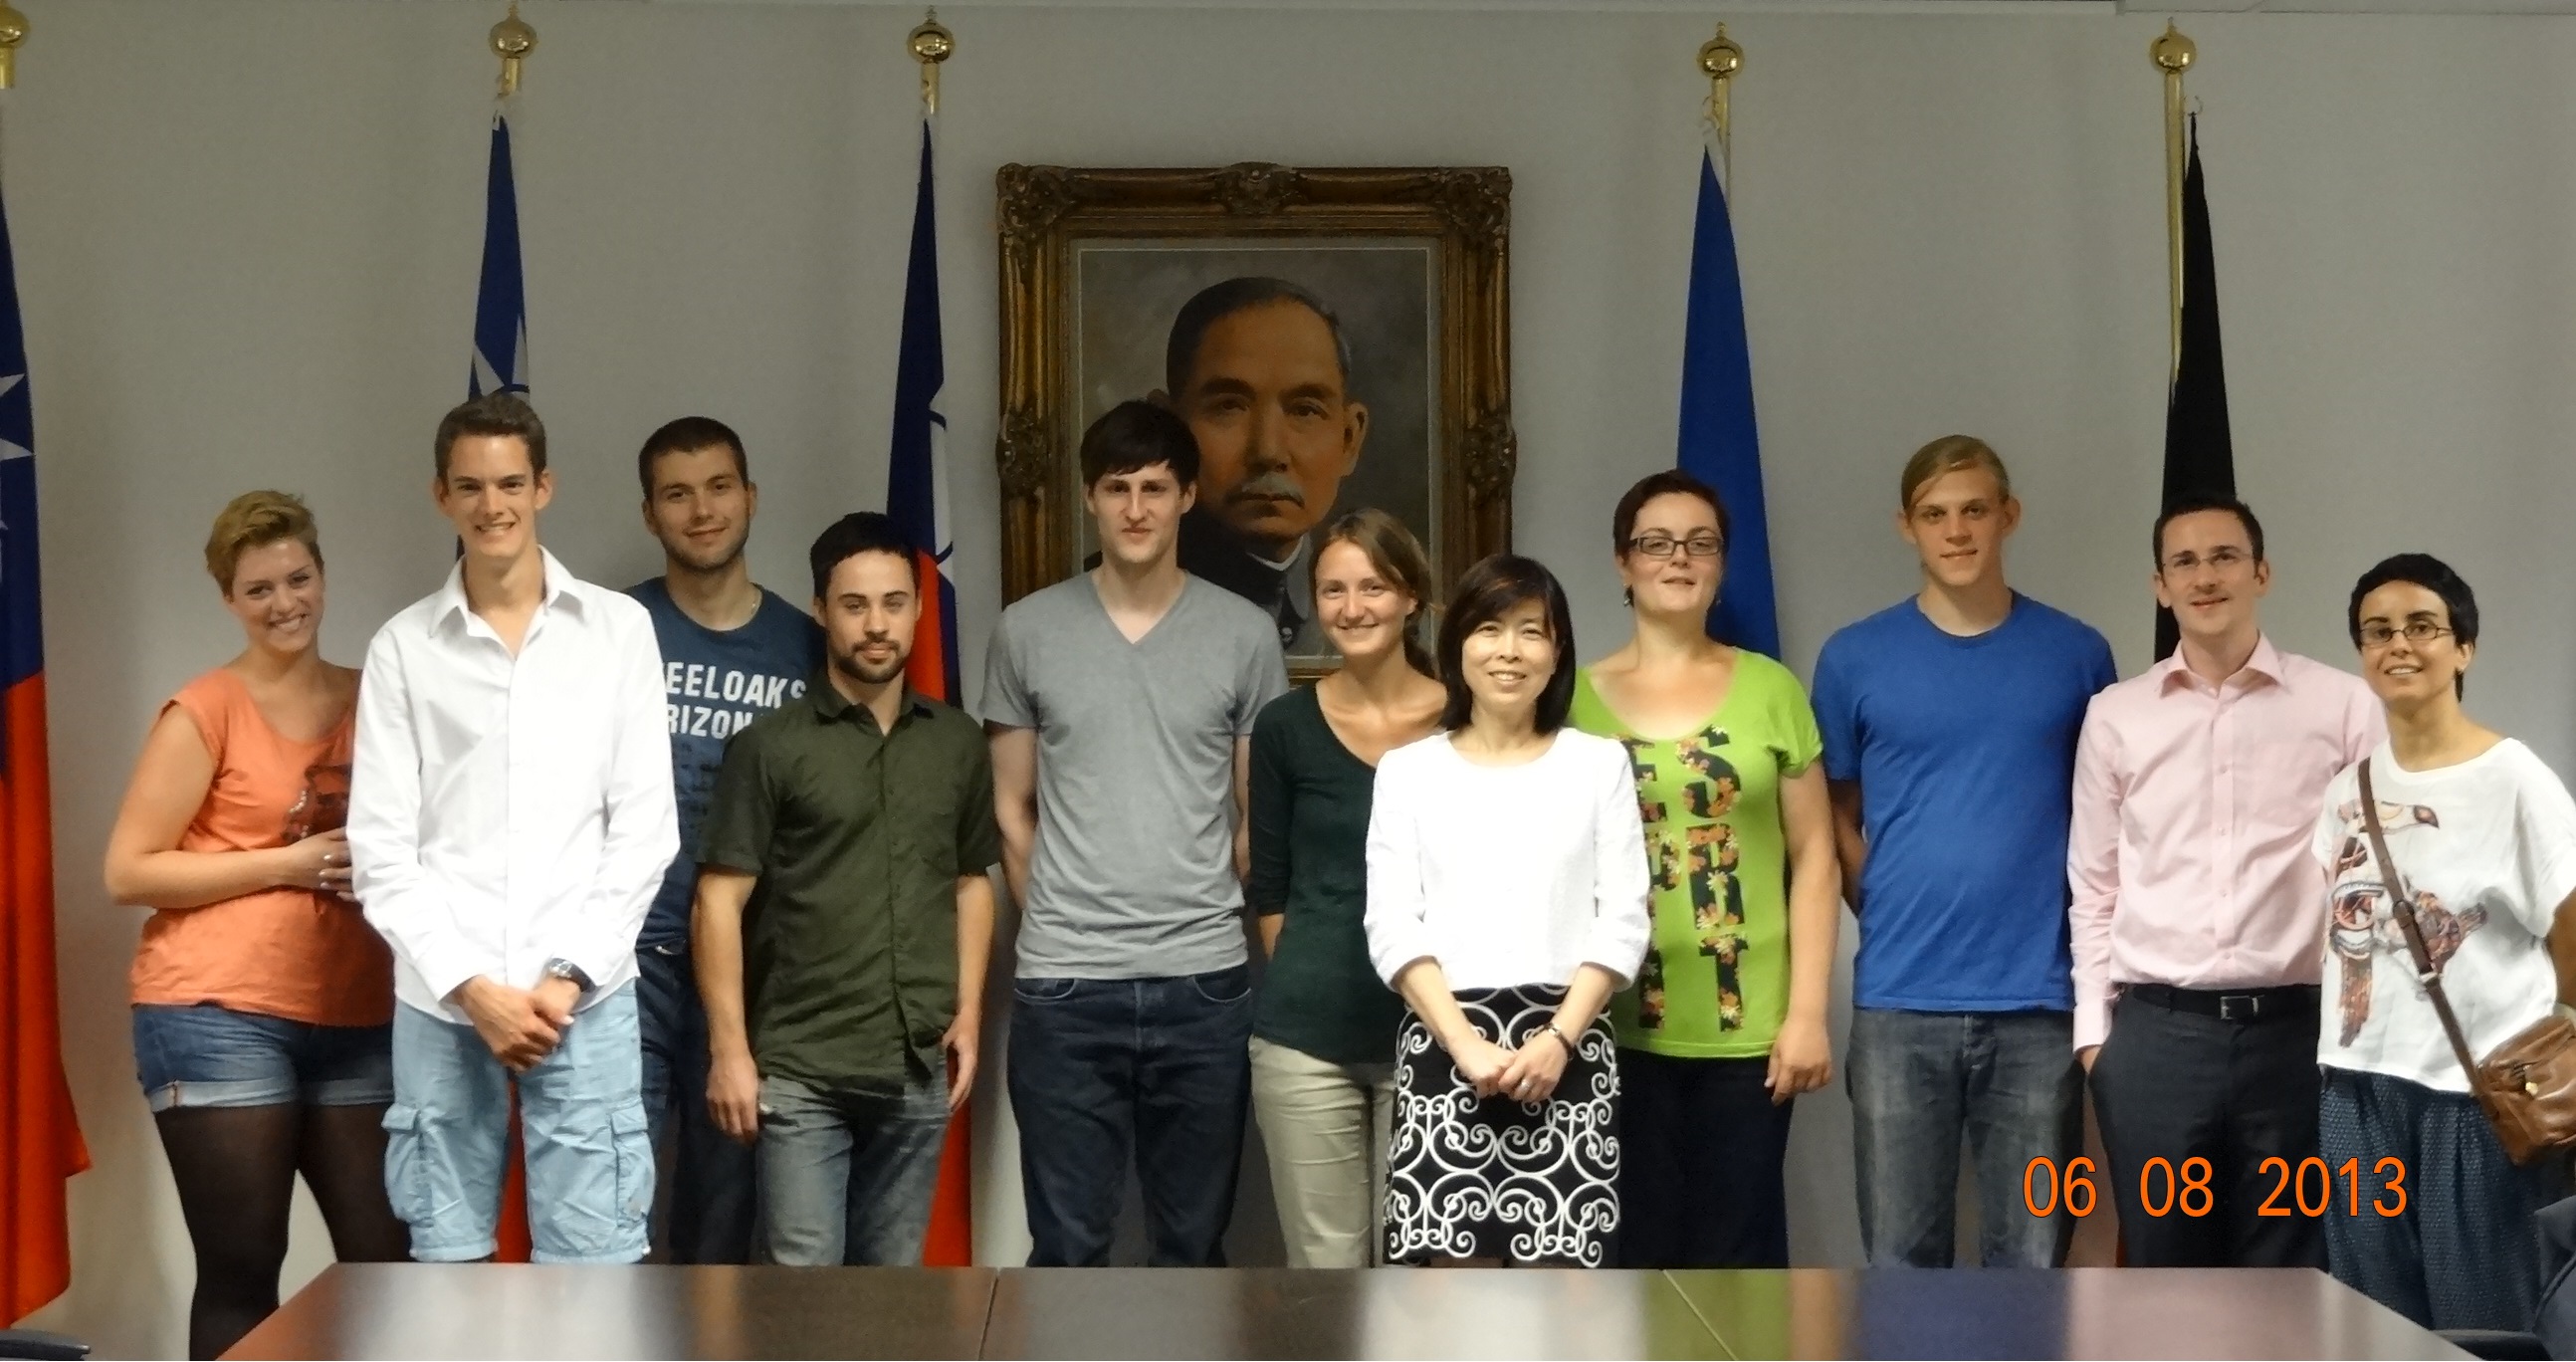 12 Belgian college students attended orientation to study in Taiwan